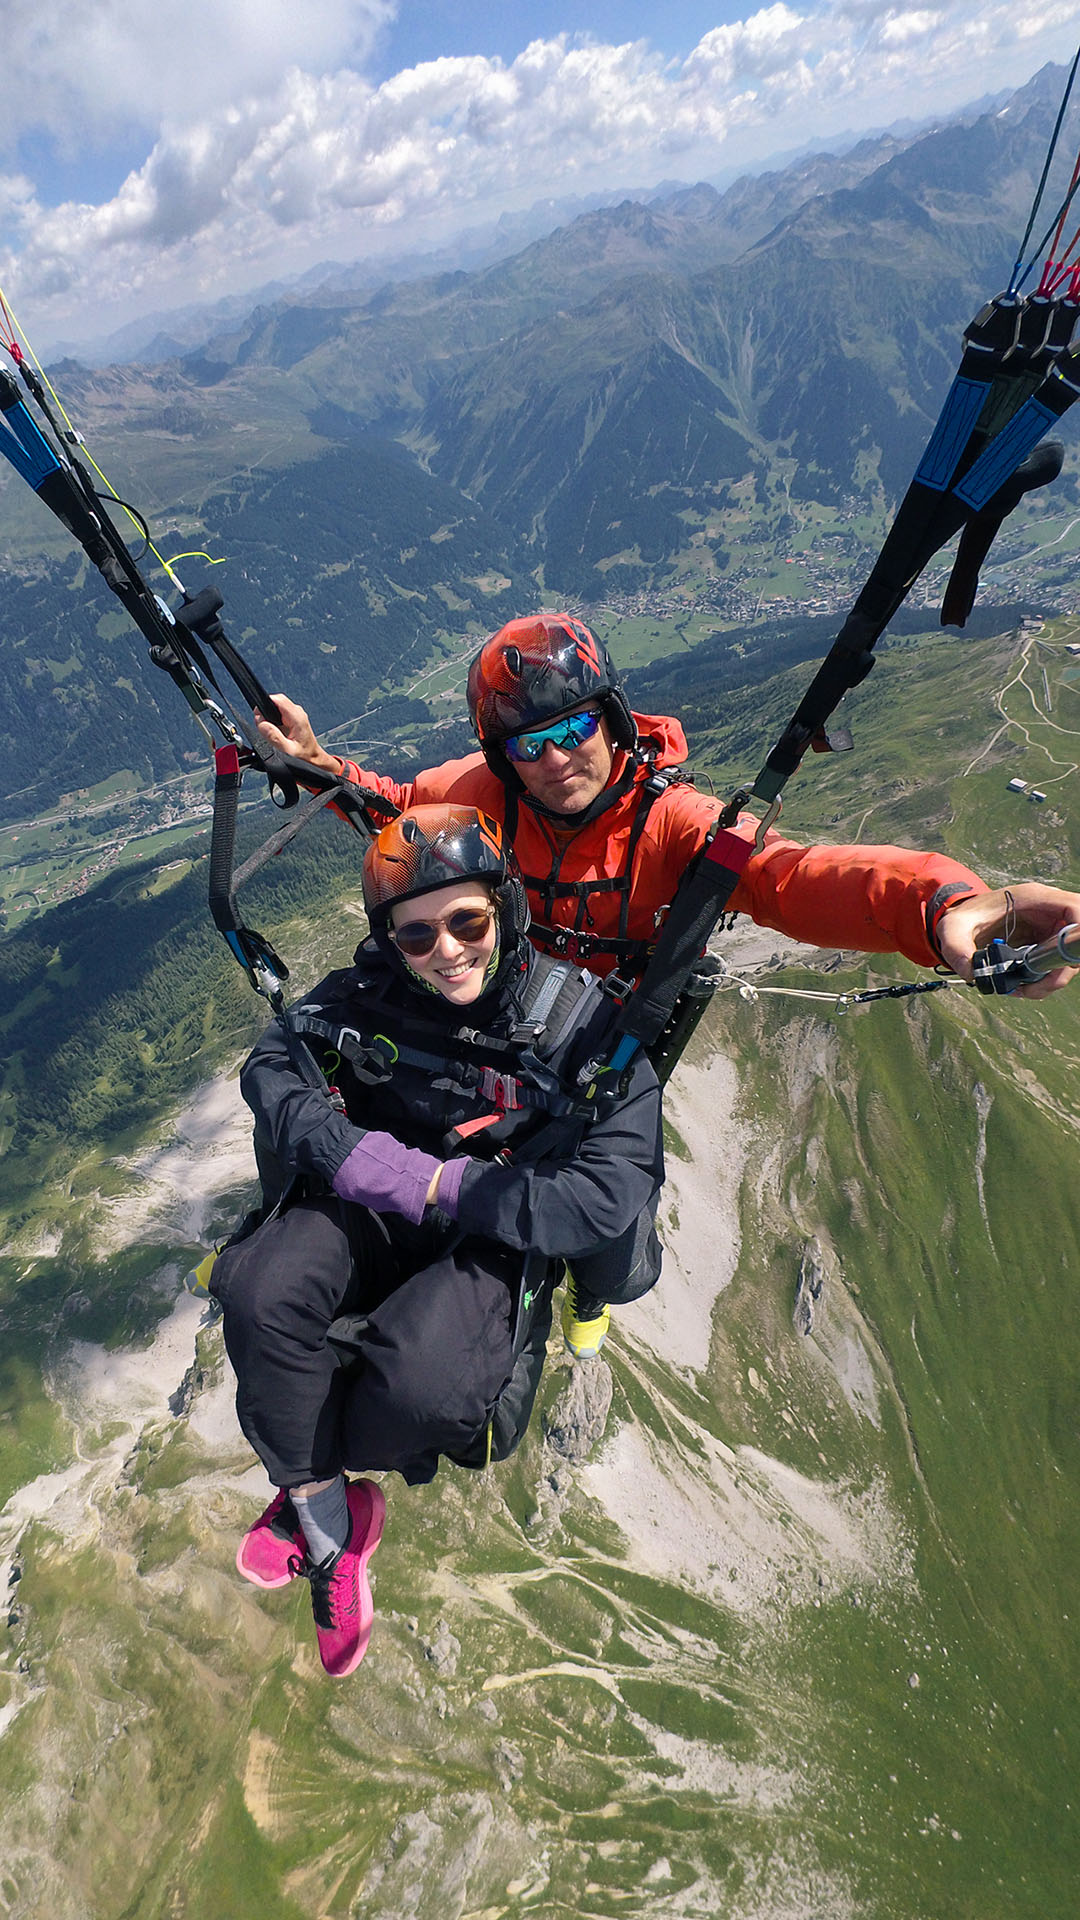 Paragliding-Thermalflight in Klosters